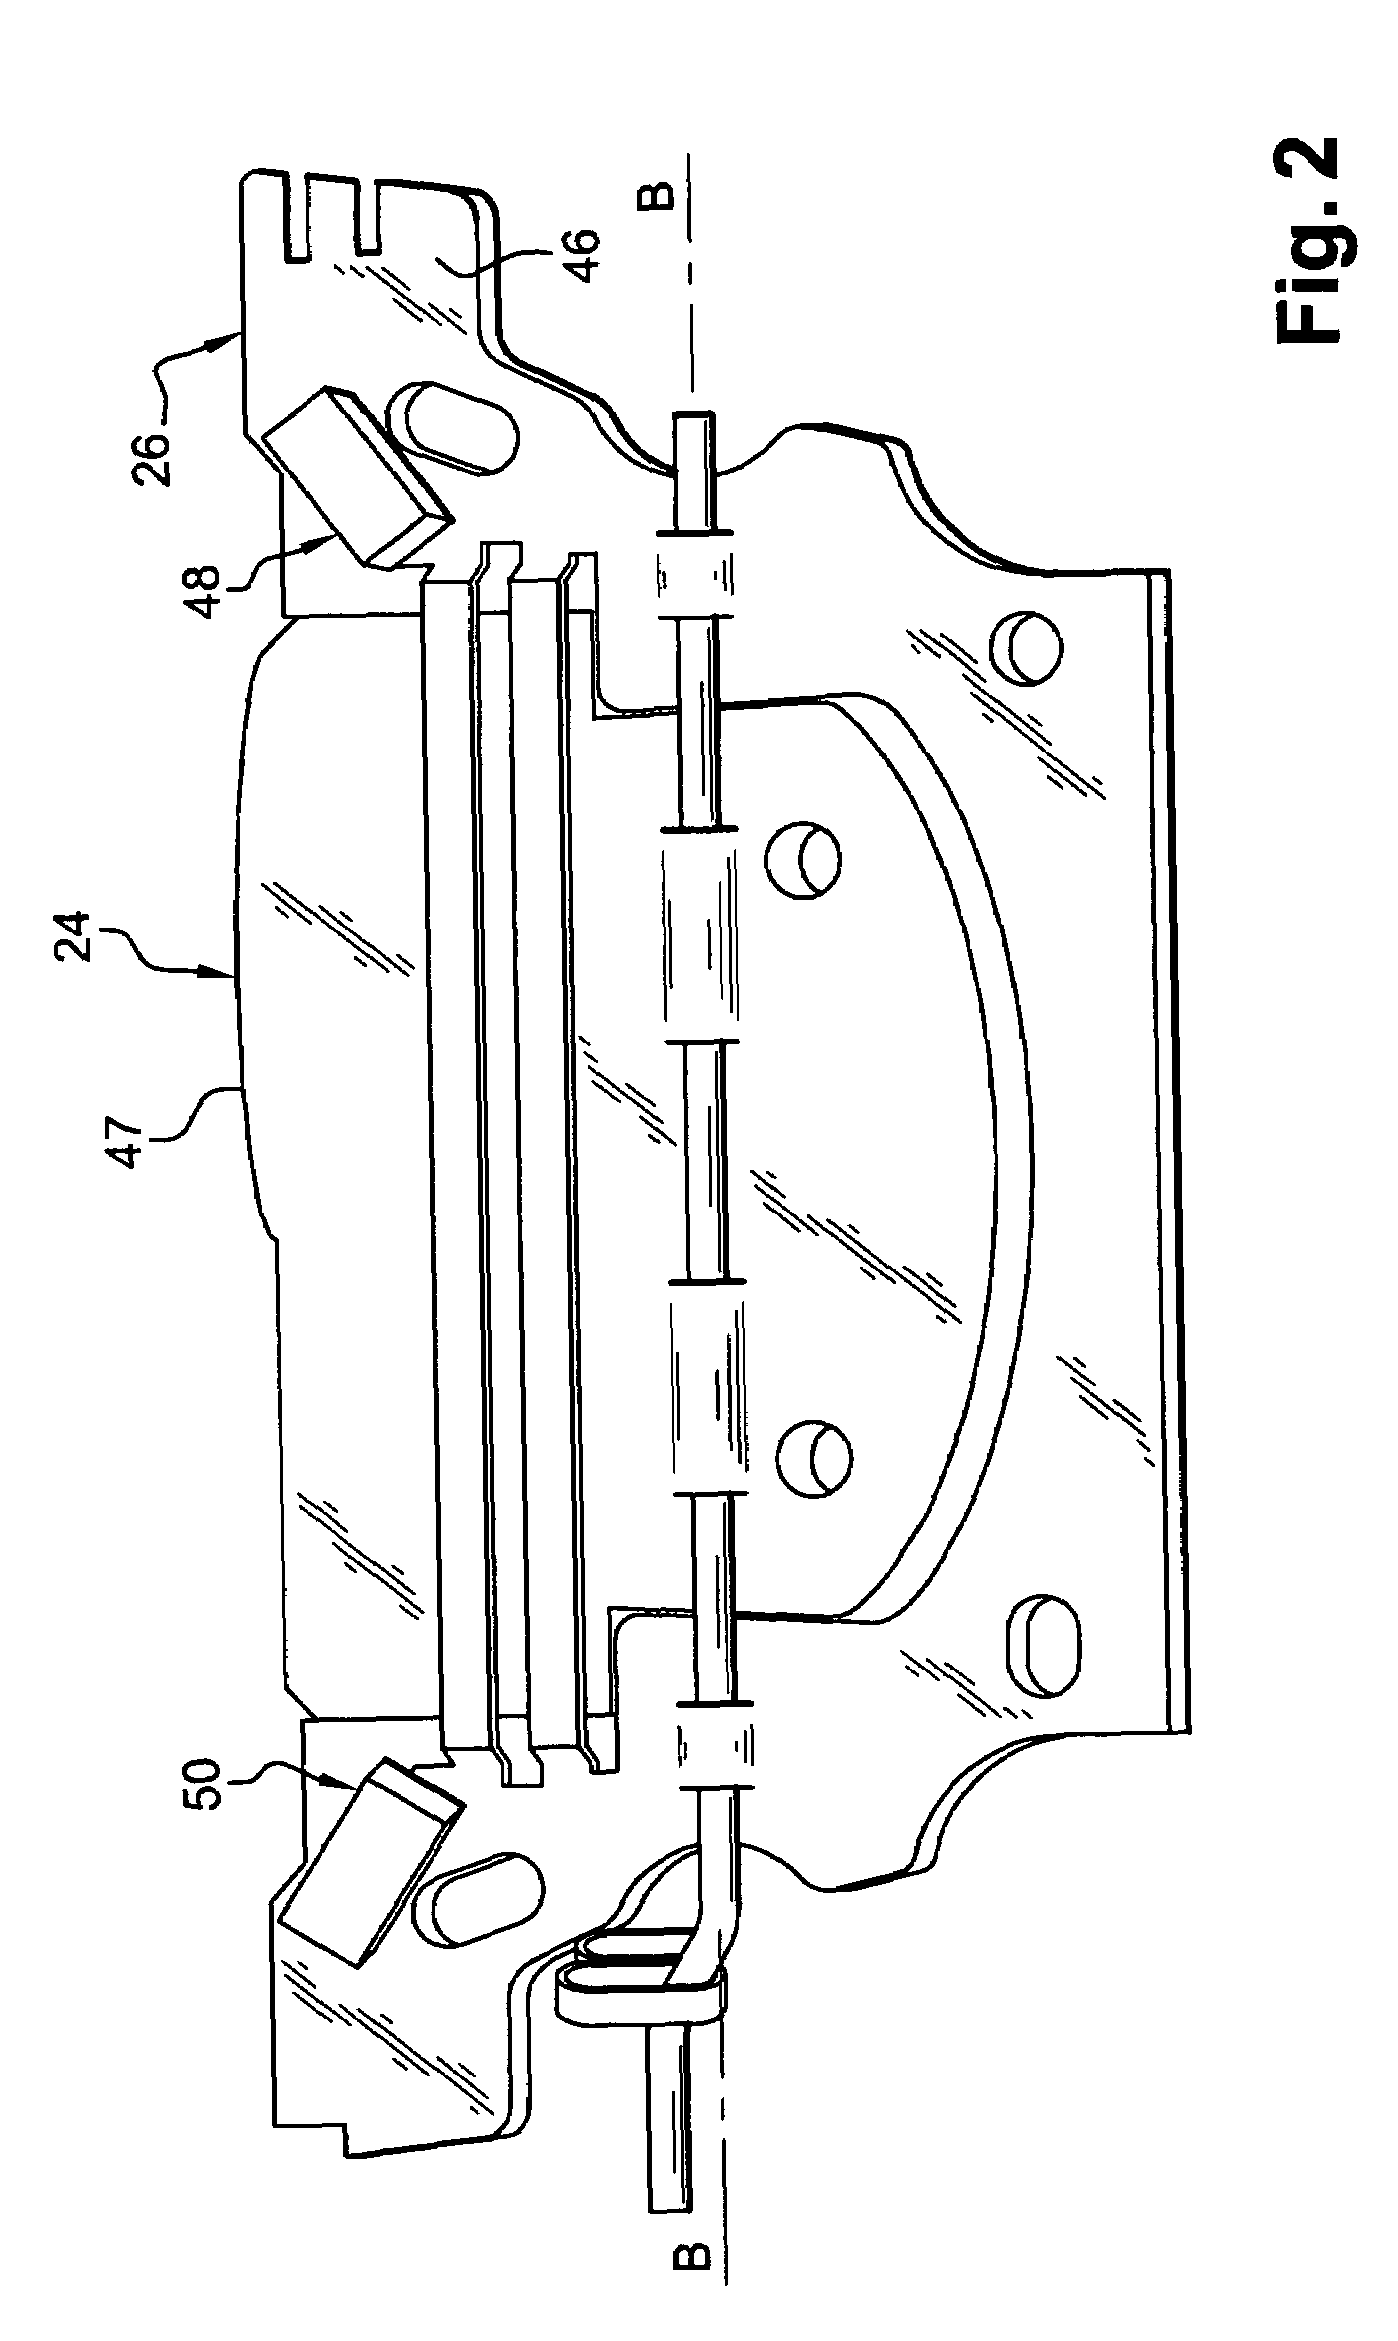 Headlamp for a motor vehicle comprising a moveable mask equipped with locking means